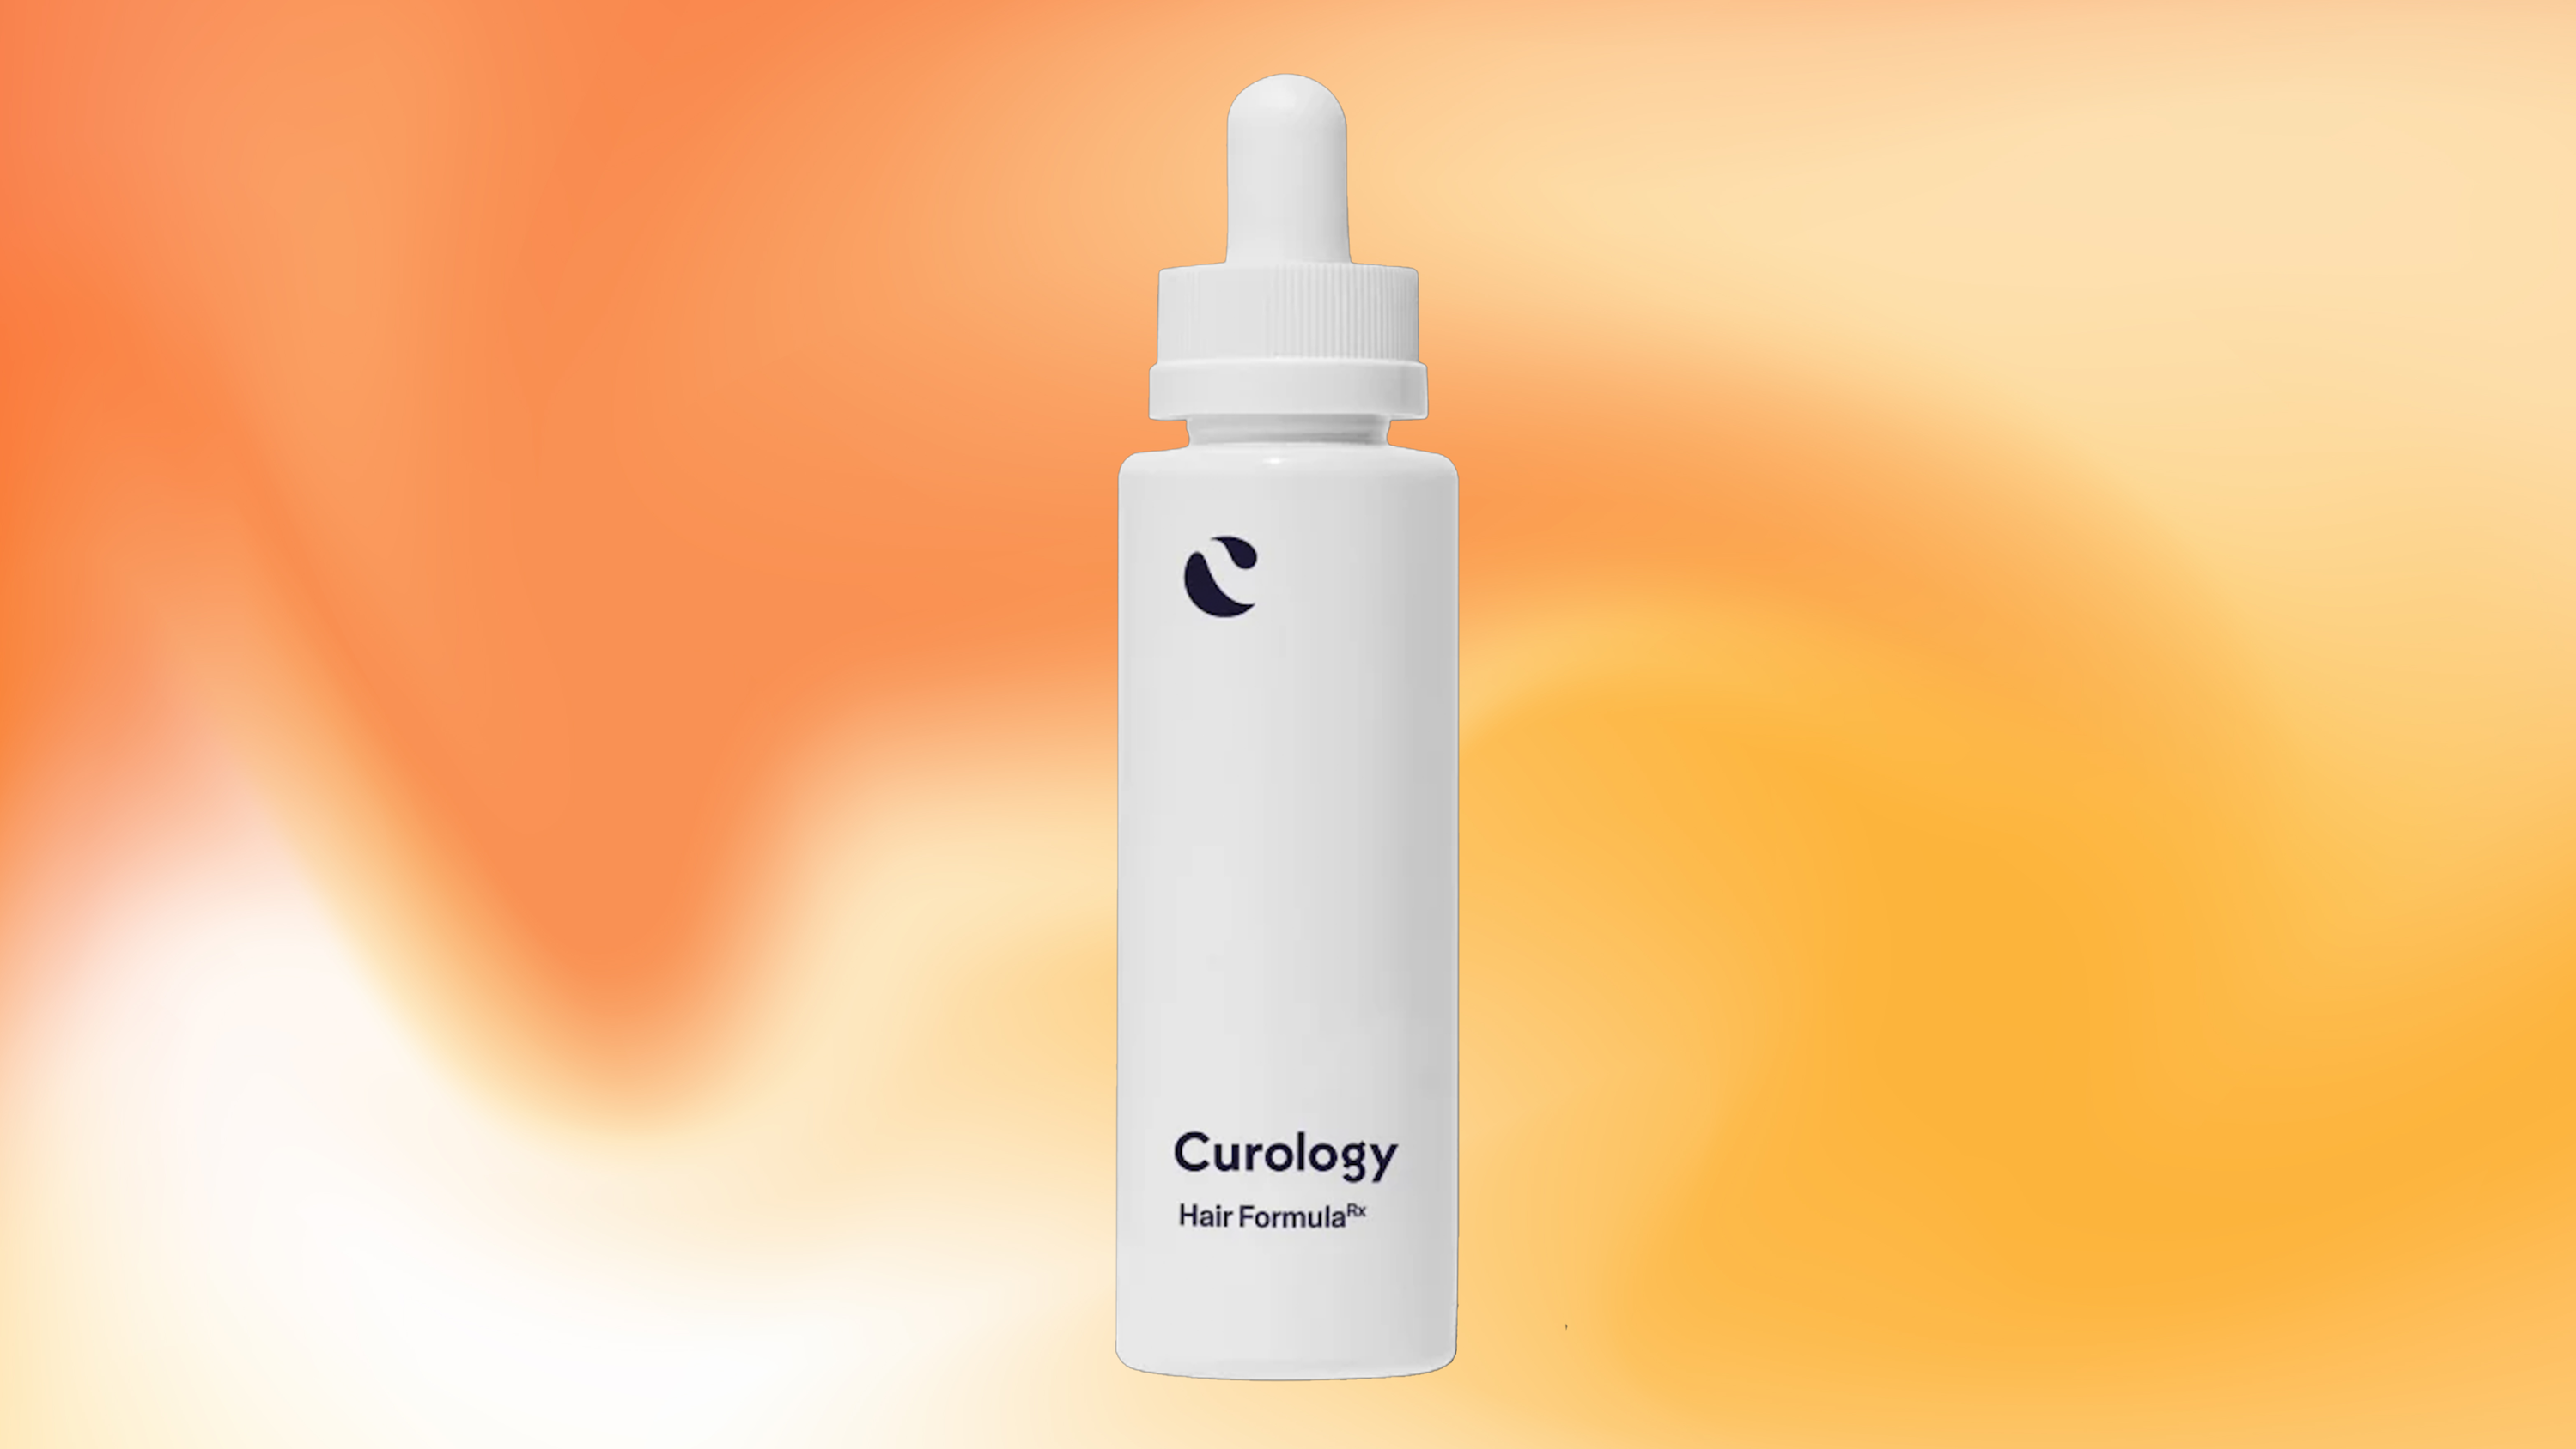 Product Of The Week: Curology Hair FormulaRx